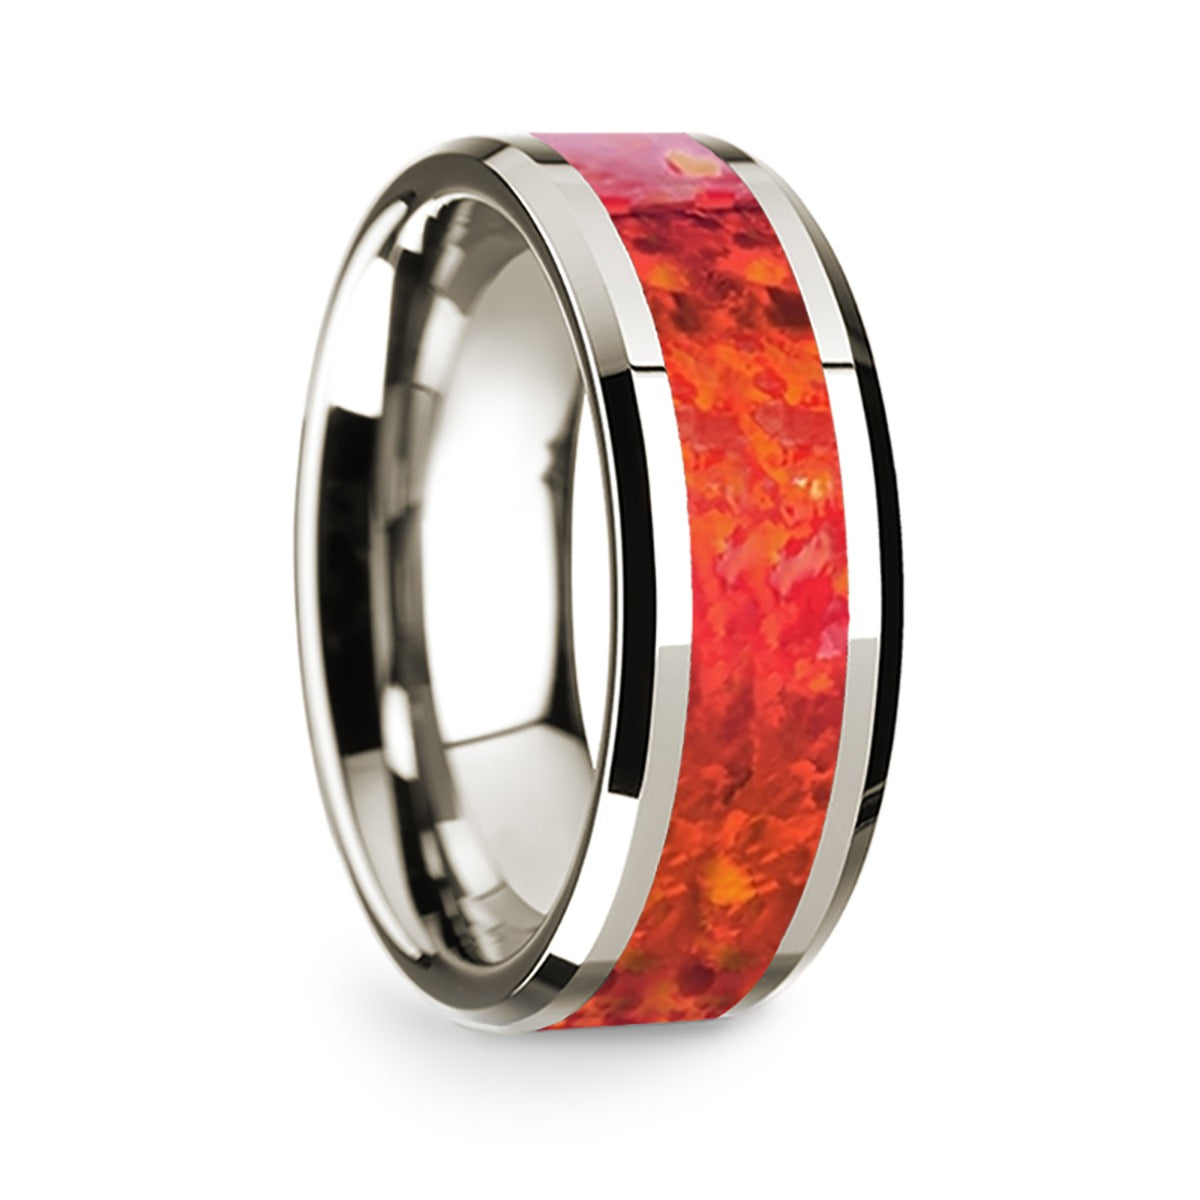 14k White Gold Men's Wedding Band with Red Opal Inlay